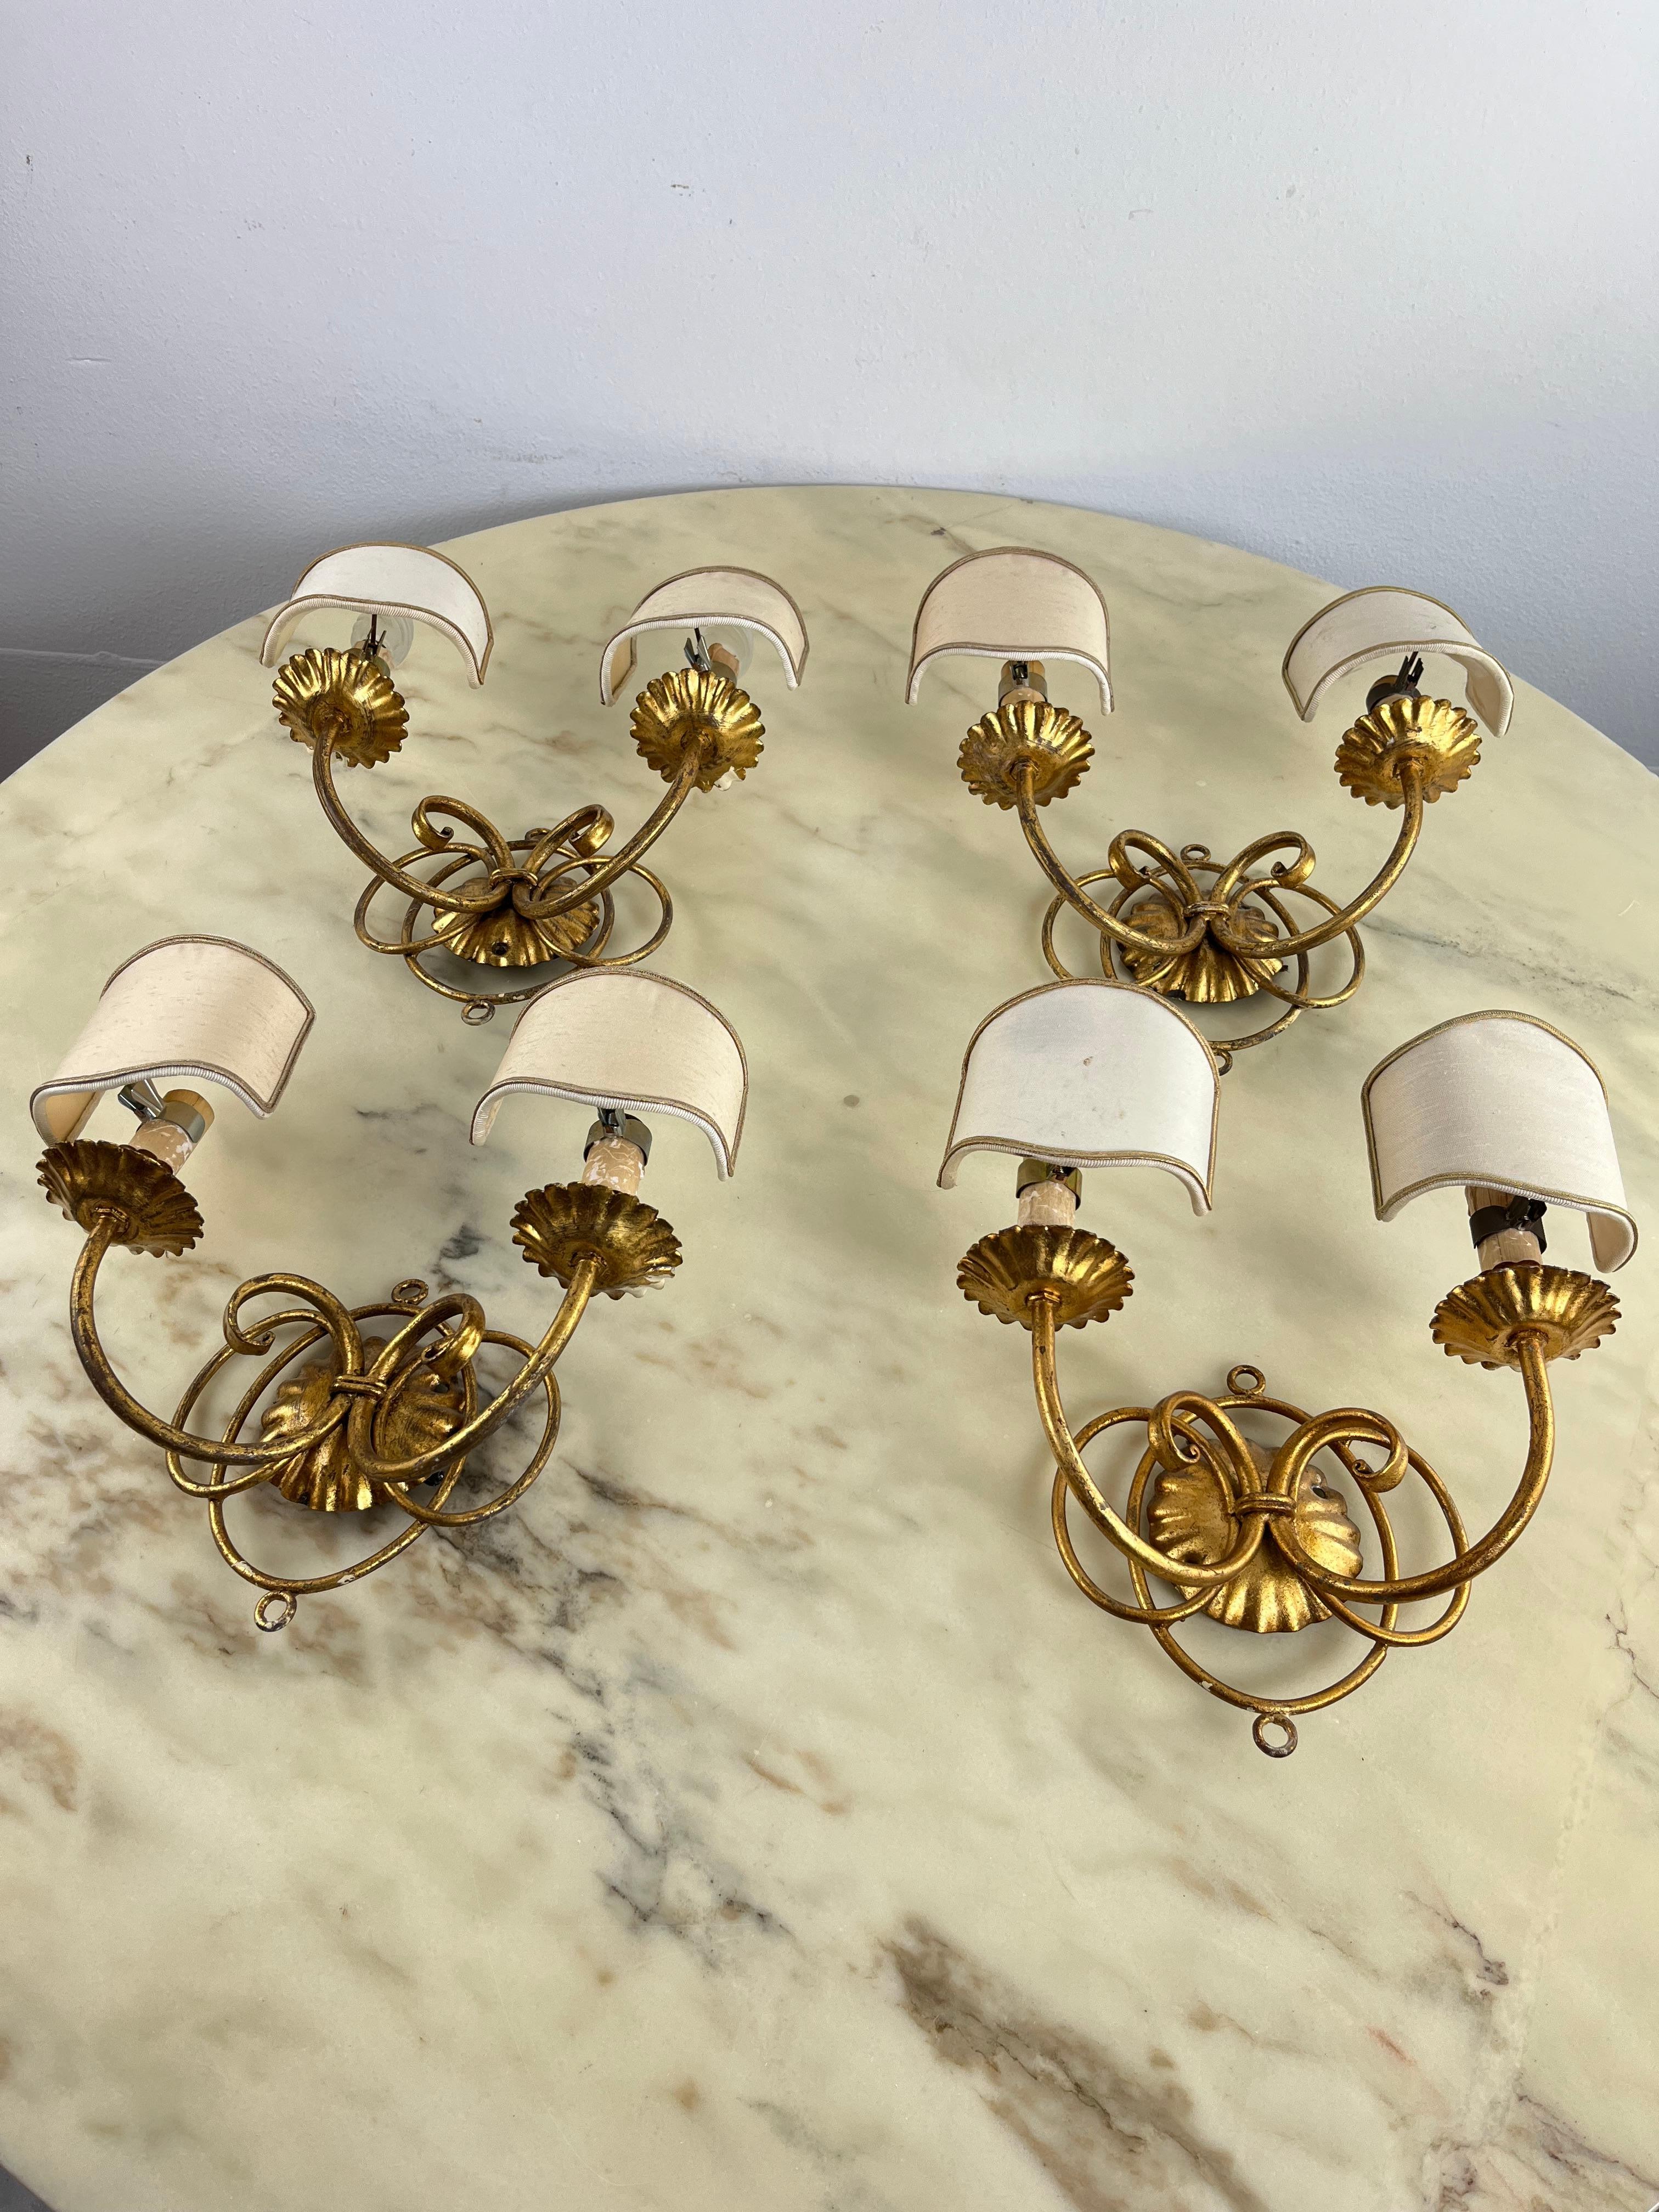 Set of 4 golden wrought iron wall lights, 80s Italian design
Handcrafted by the Li Puma company of Florence. Each has two e14 lamps equipped with small fabric shades.
Intact and functioning.
Good condition, small signs of aging.